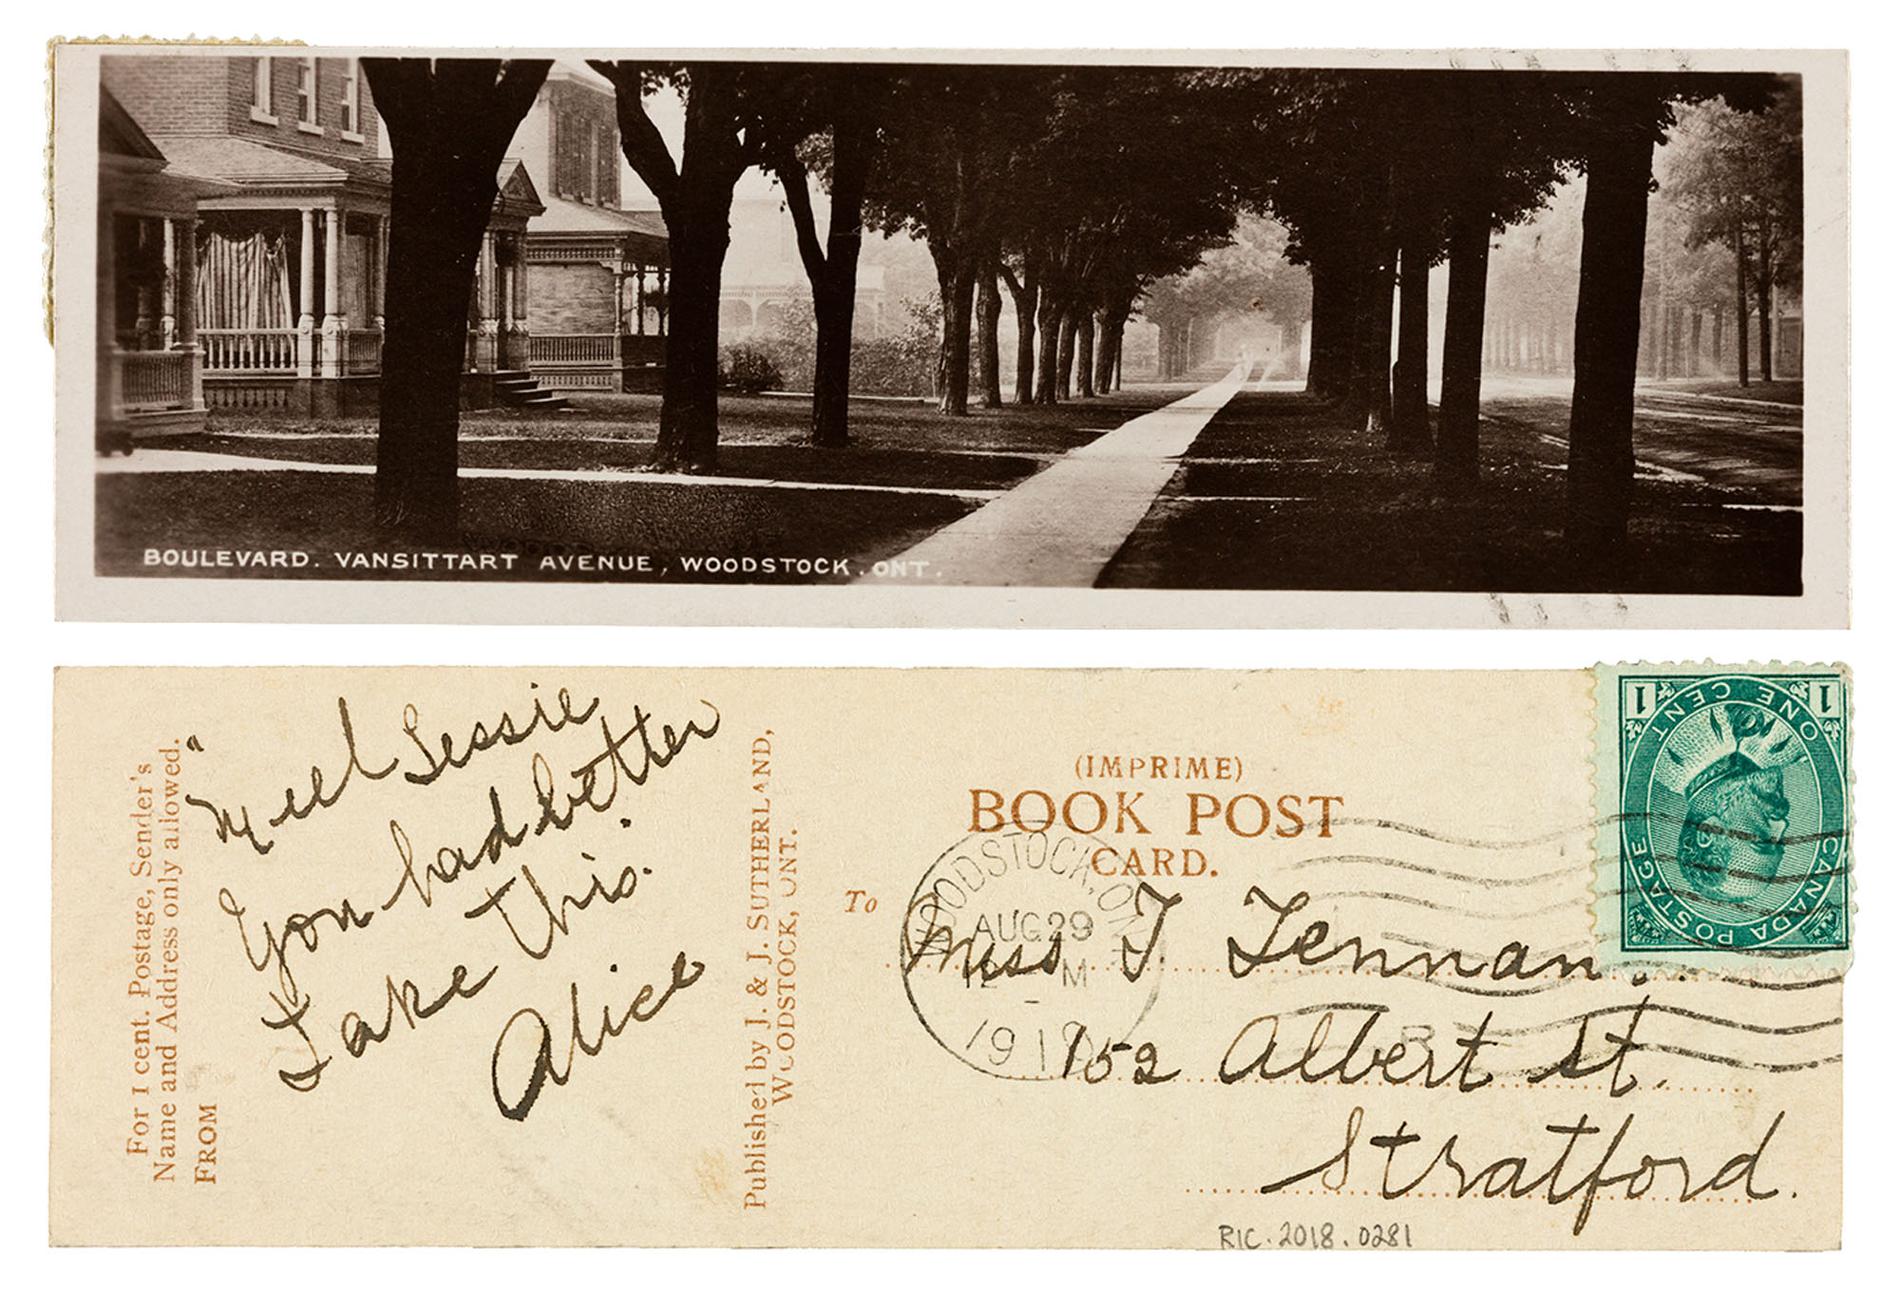 The view down the sidewalk of a picturesque treed street, with the message side of the postcard below